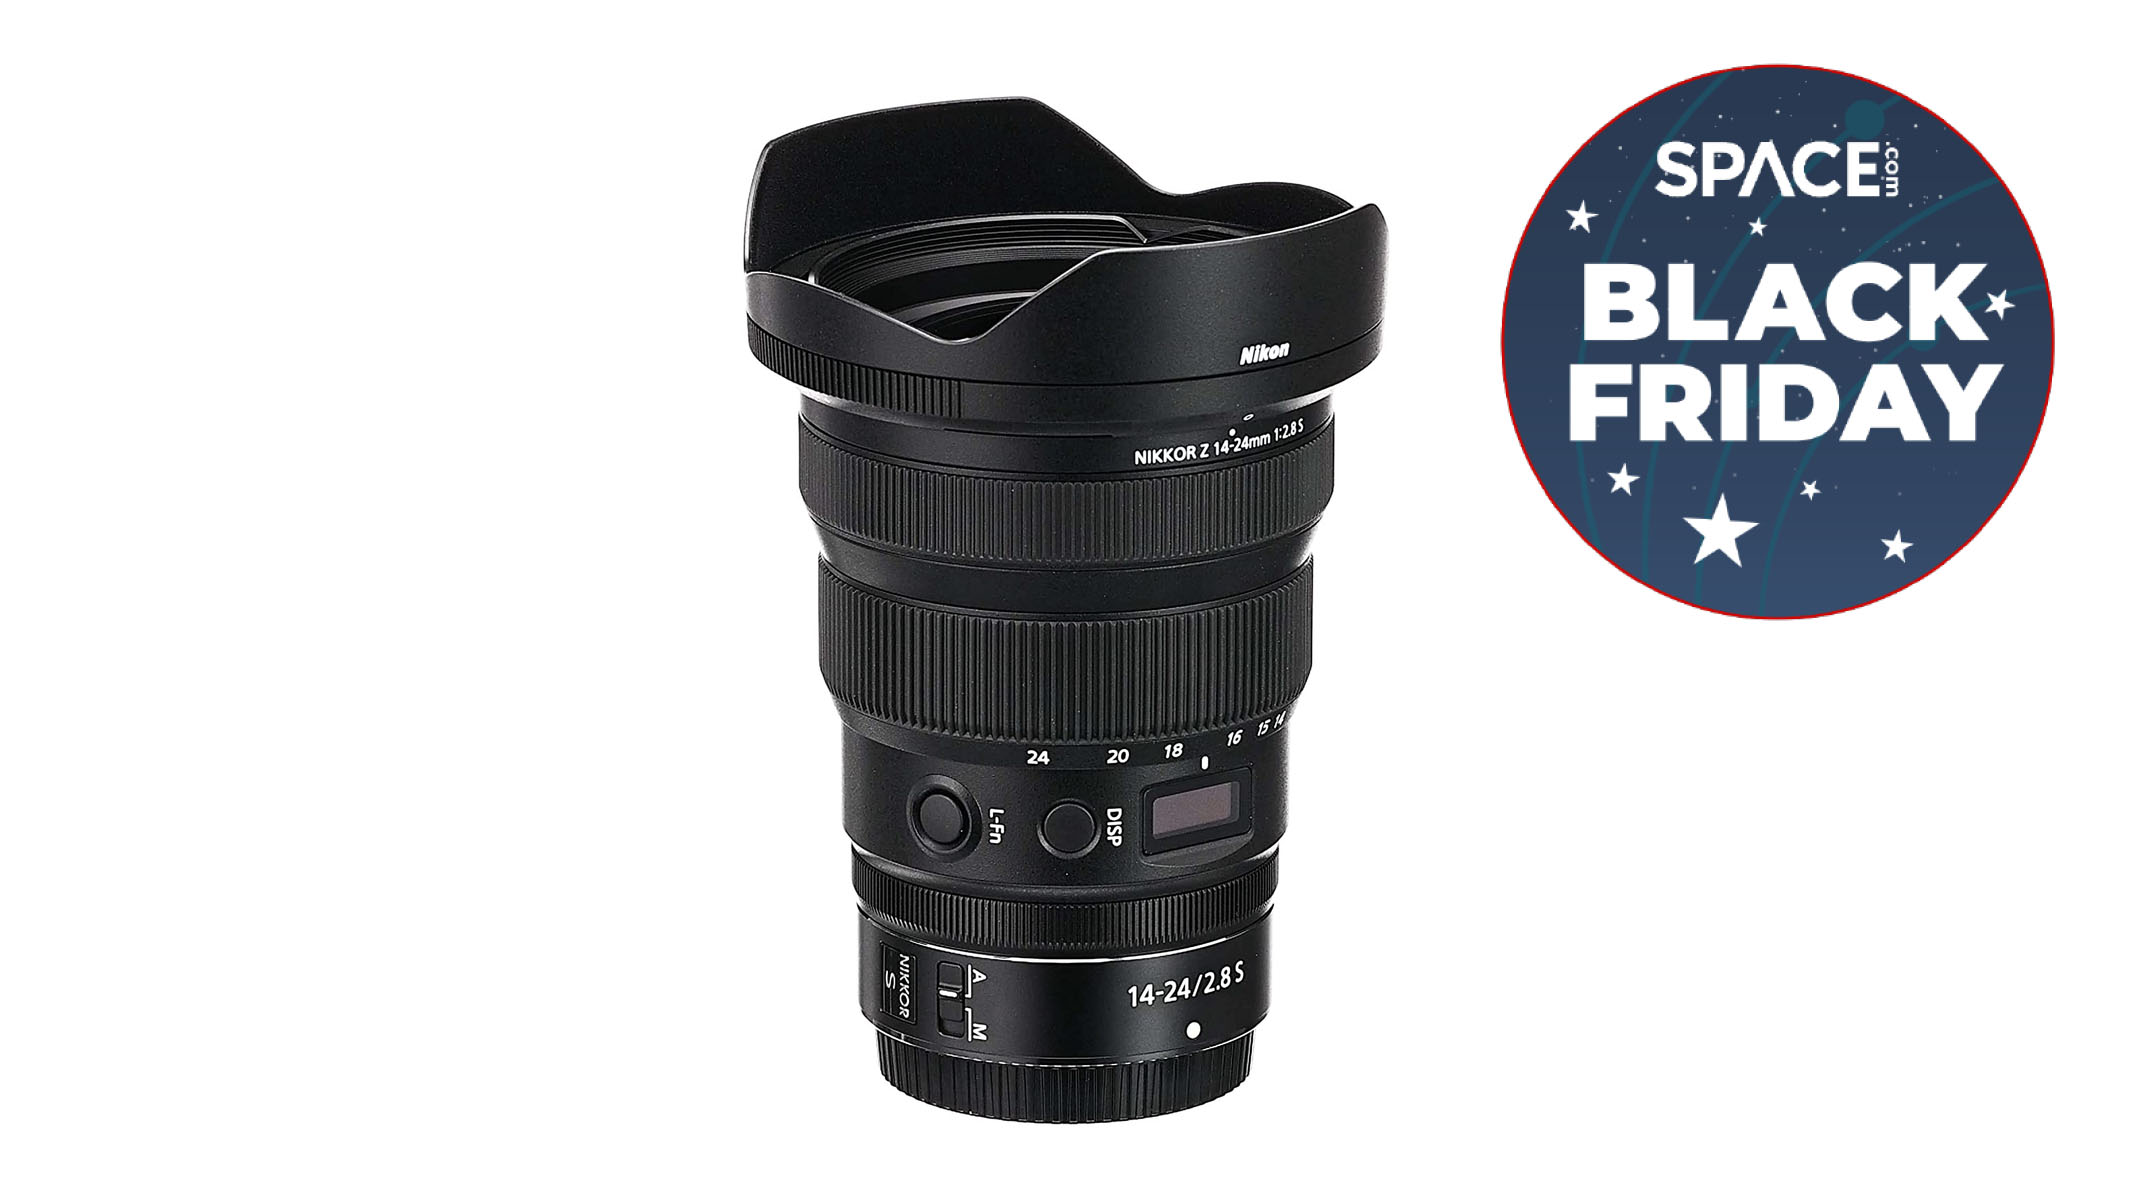 Black Friday: Save $200 on this Nikon Z 14-24mm f/2.8 S lens Space